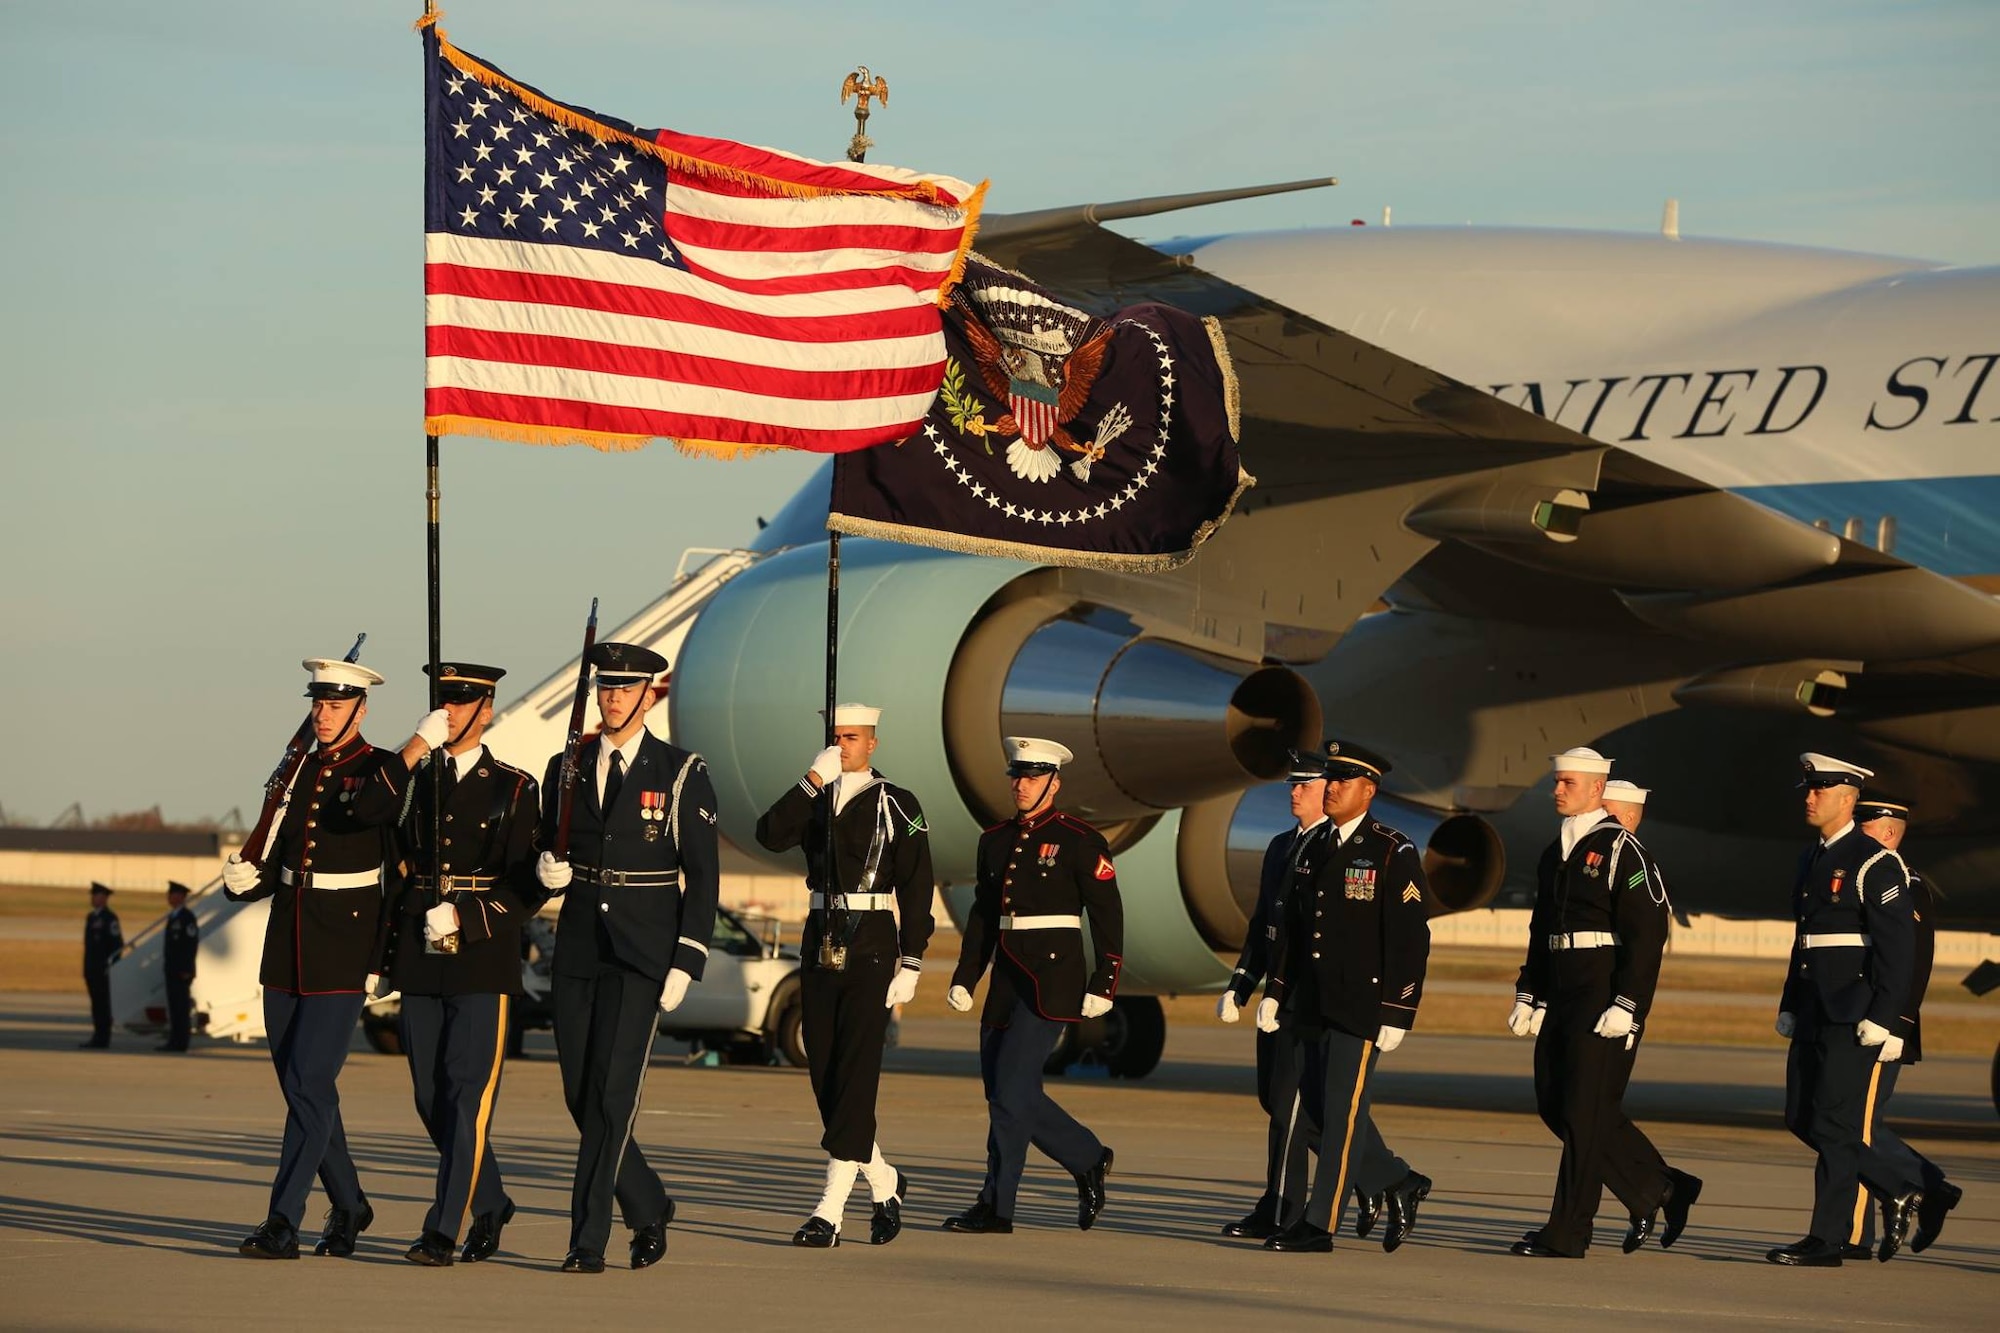 U.S. service members with the Ceremonial Honor Guard march off as the casket of George H. W. Bush, the 41st President of the United States,departs Andrews Air Base, Md., Dec. 03, 2018.